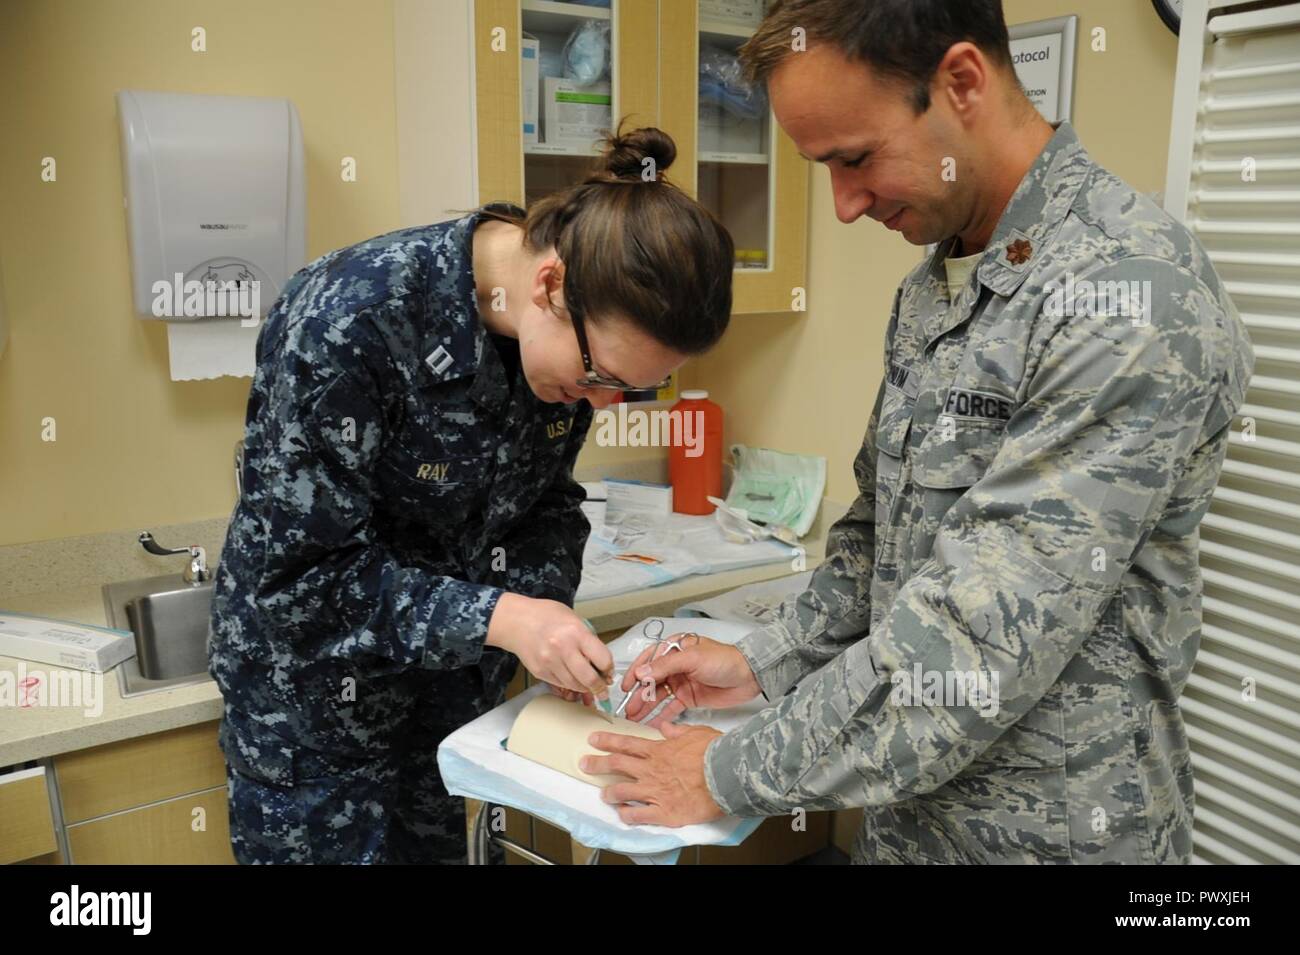 Dr. (Maj.) William Bynum (right), 11th Medical Group, advises Dr. (Lt.) Mary Beth Ray, Family Medicine Residency Program, on how to simulate placing a hormone implant into a patient’s arm June 13, 2017 at the Fort Belvoir Community Hospital, Va. The implant is a birth control method administered to some of the adolescent and adult, a key patient population treated by the hospital's family medicine residents and faculty. Stock Photo